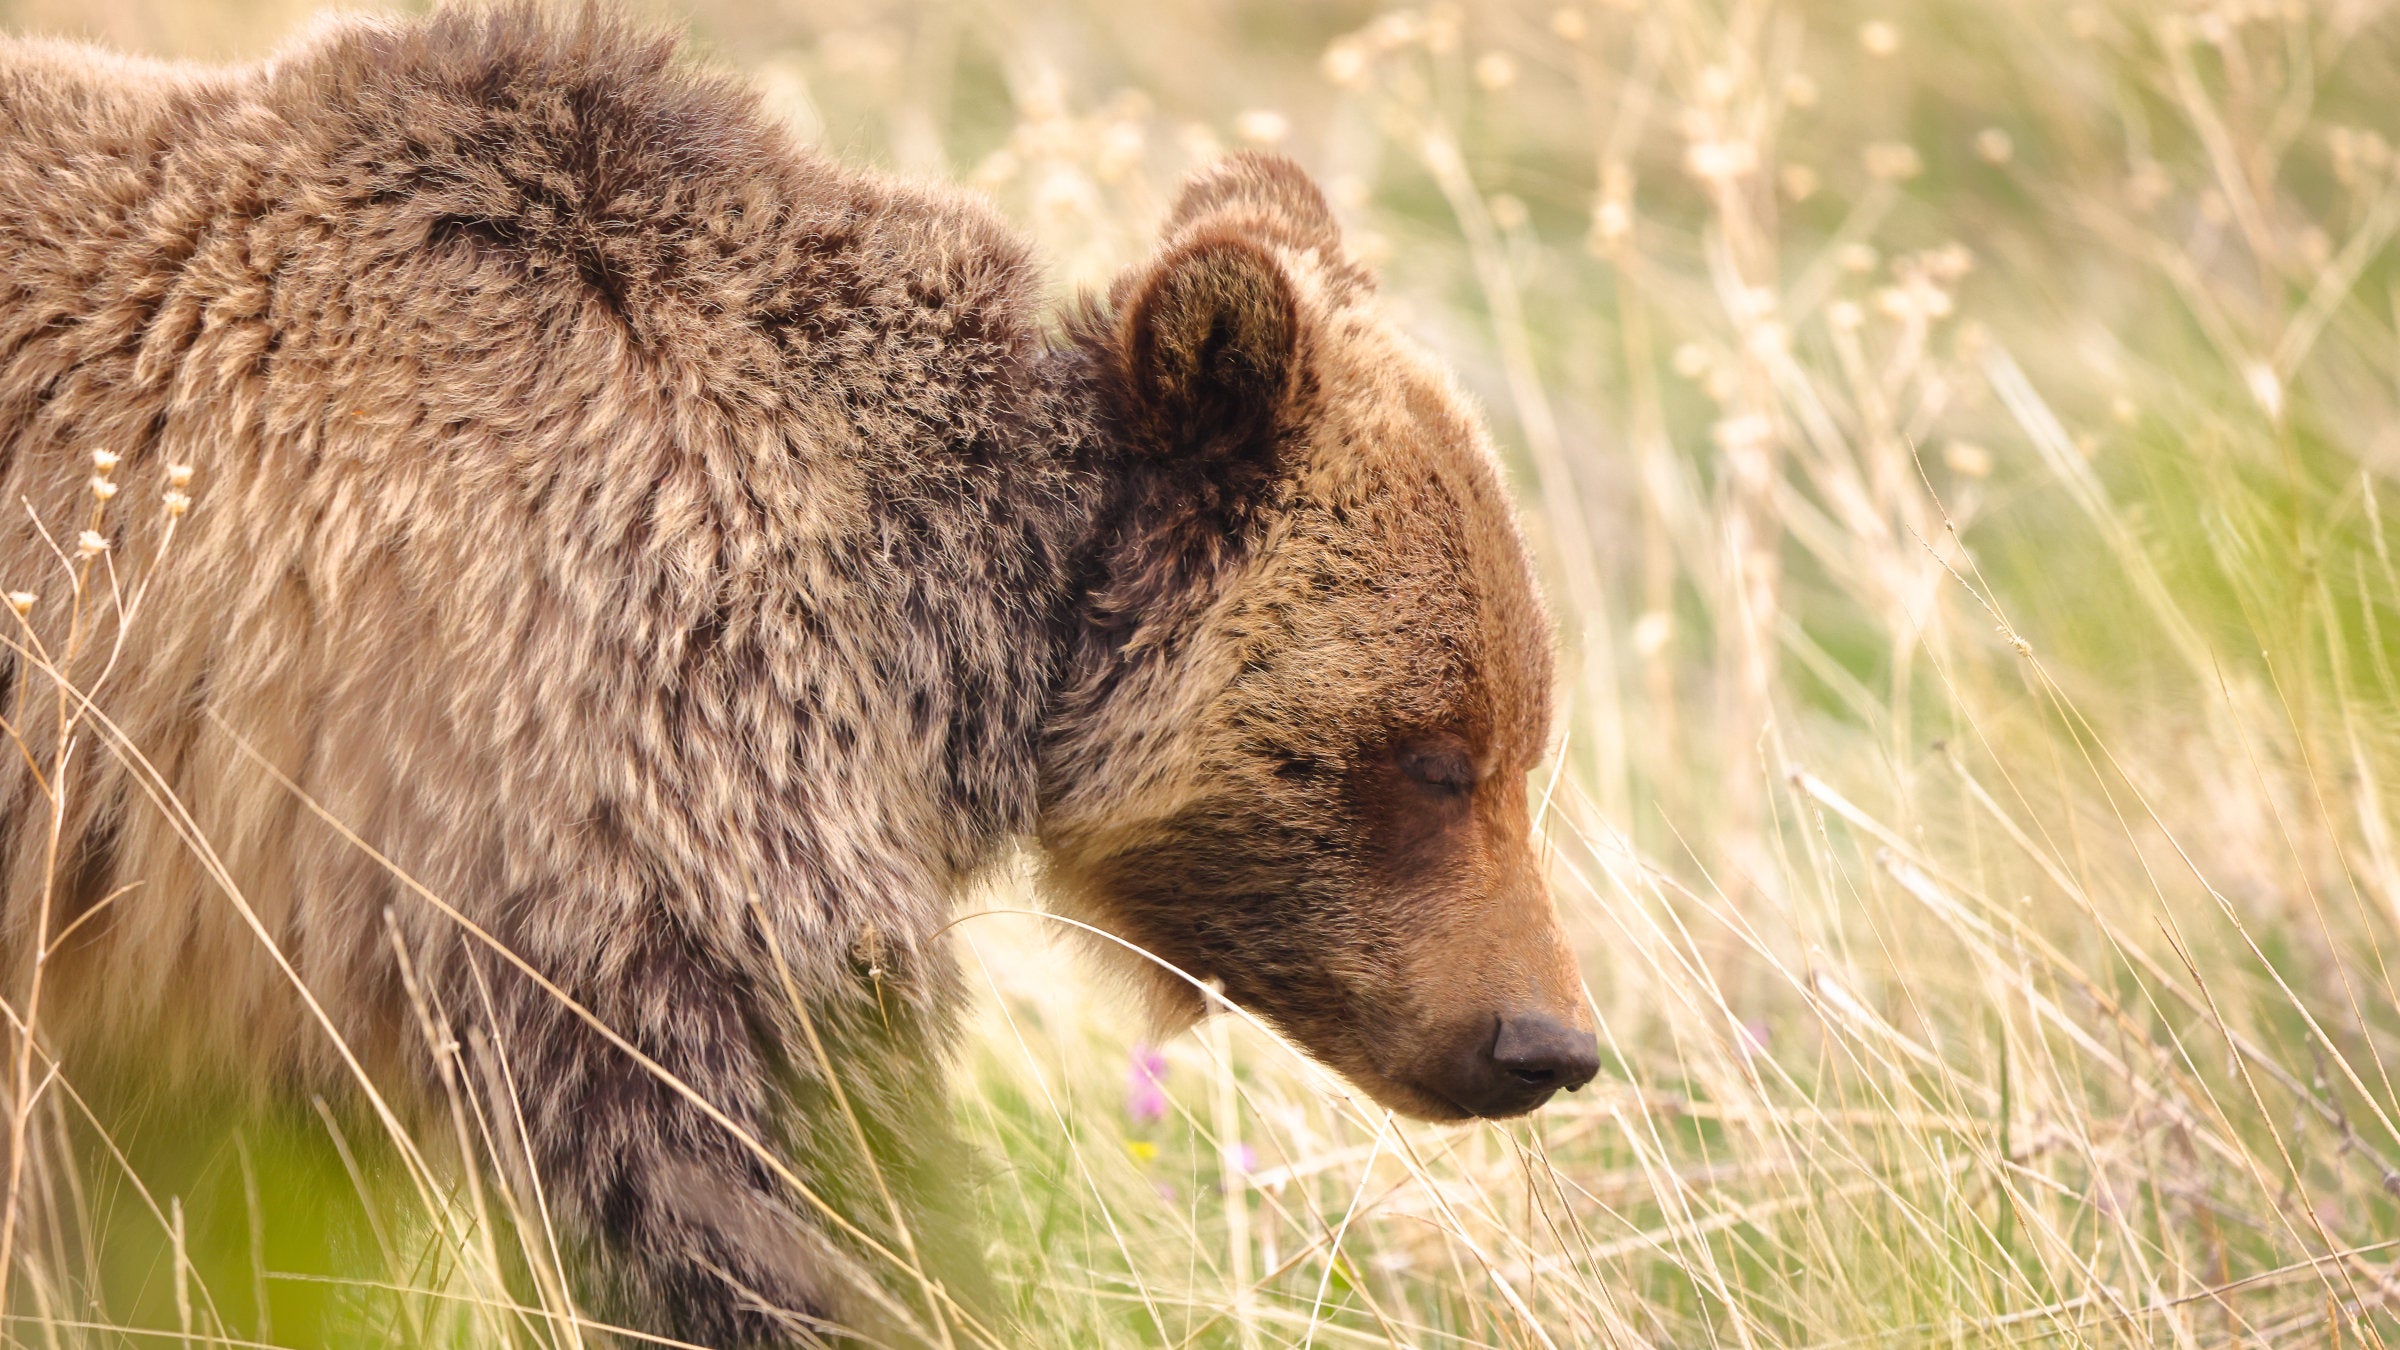 Woman Is Killed by a Bear Near Yellowstone, Officials Say - The